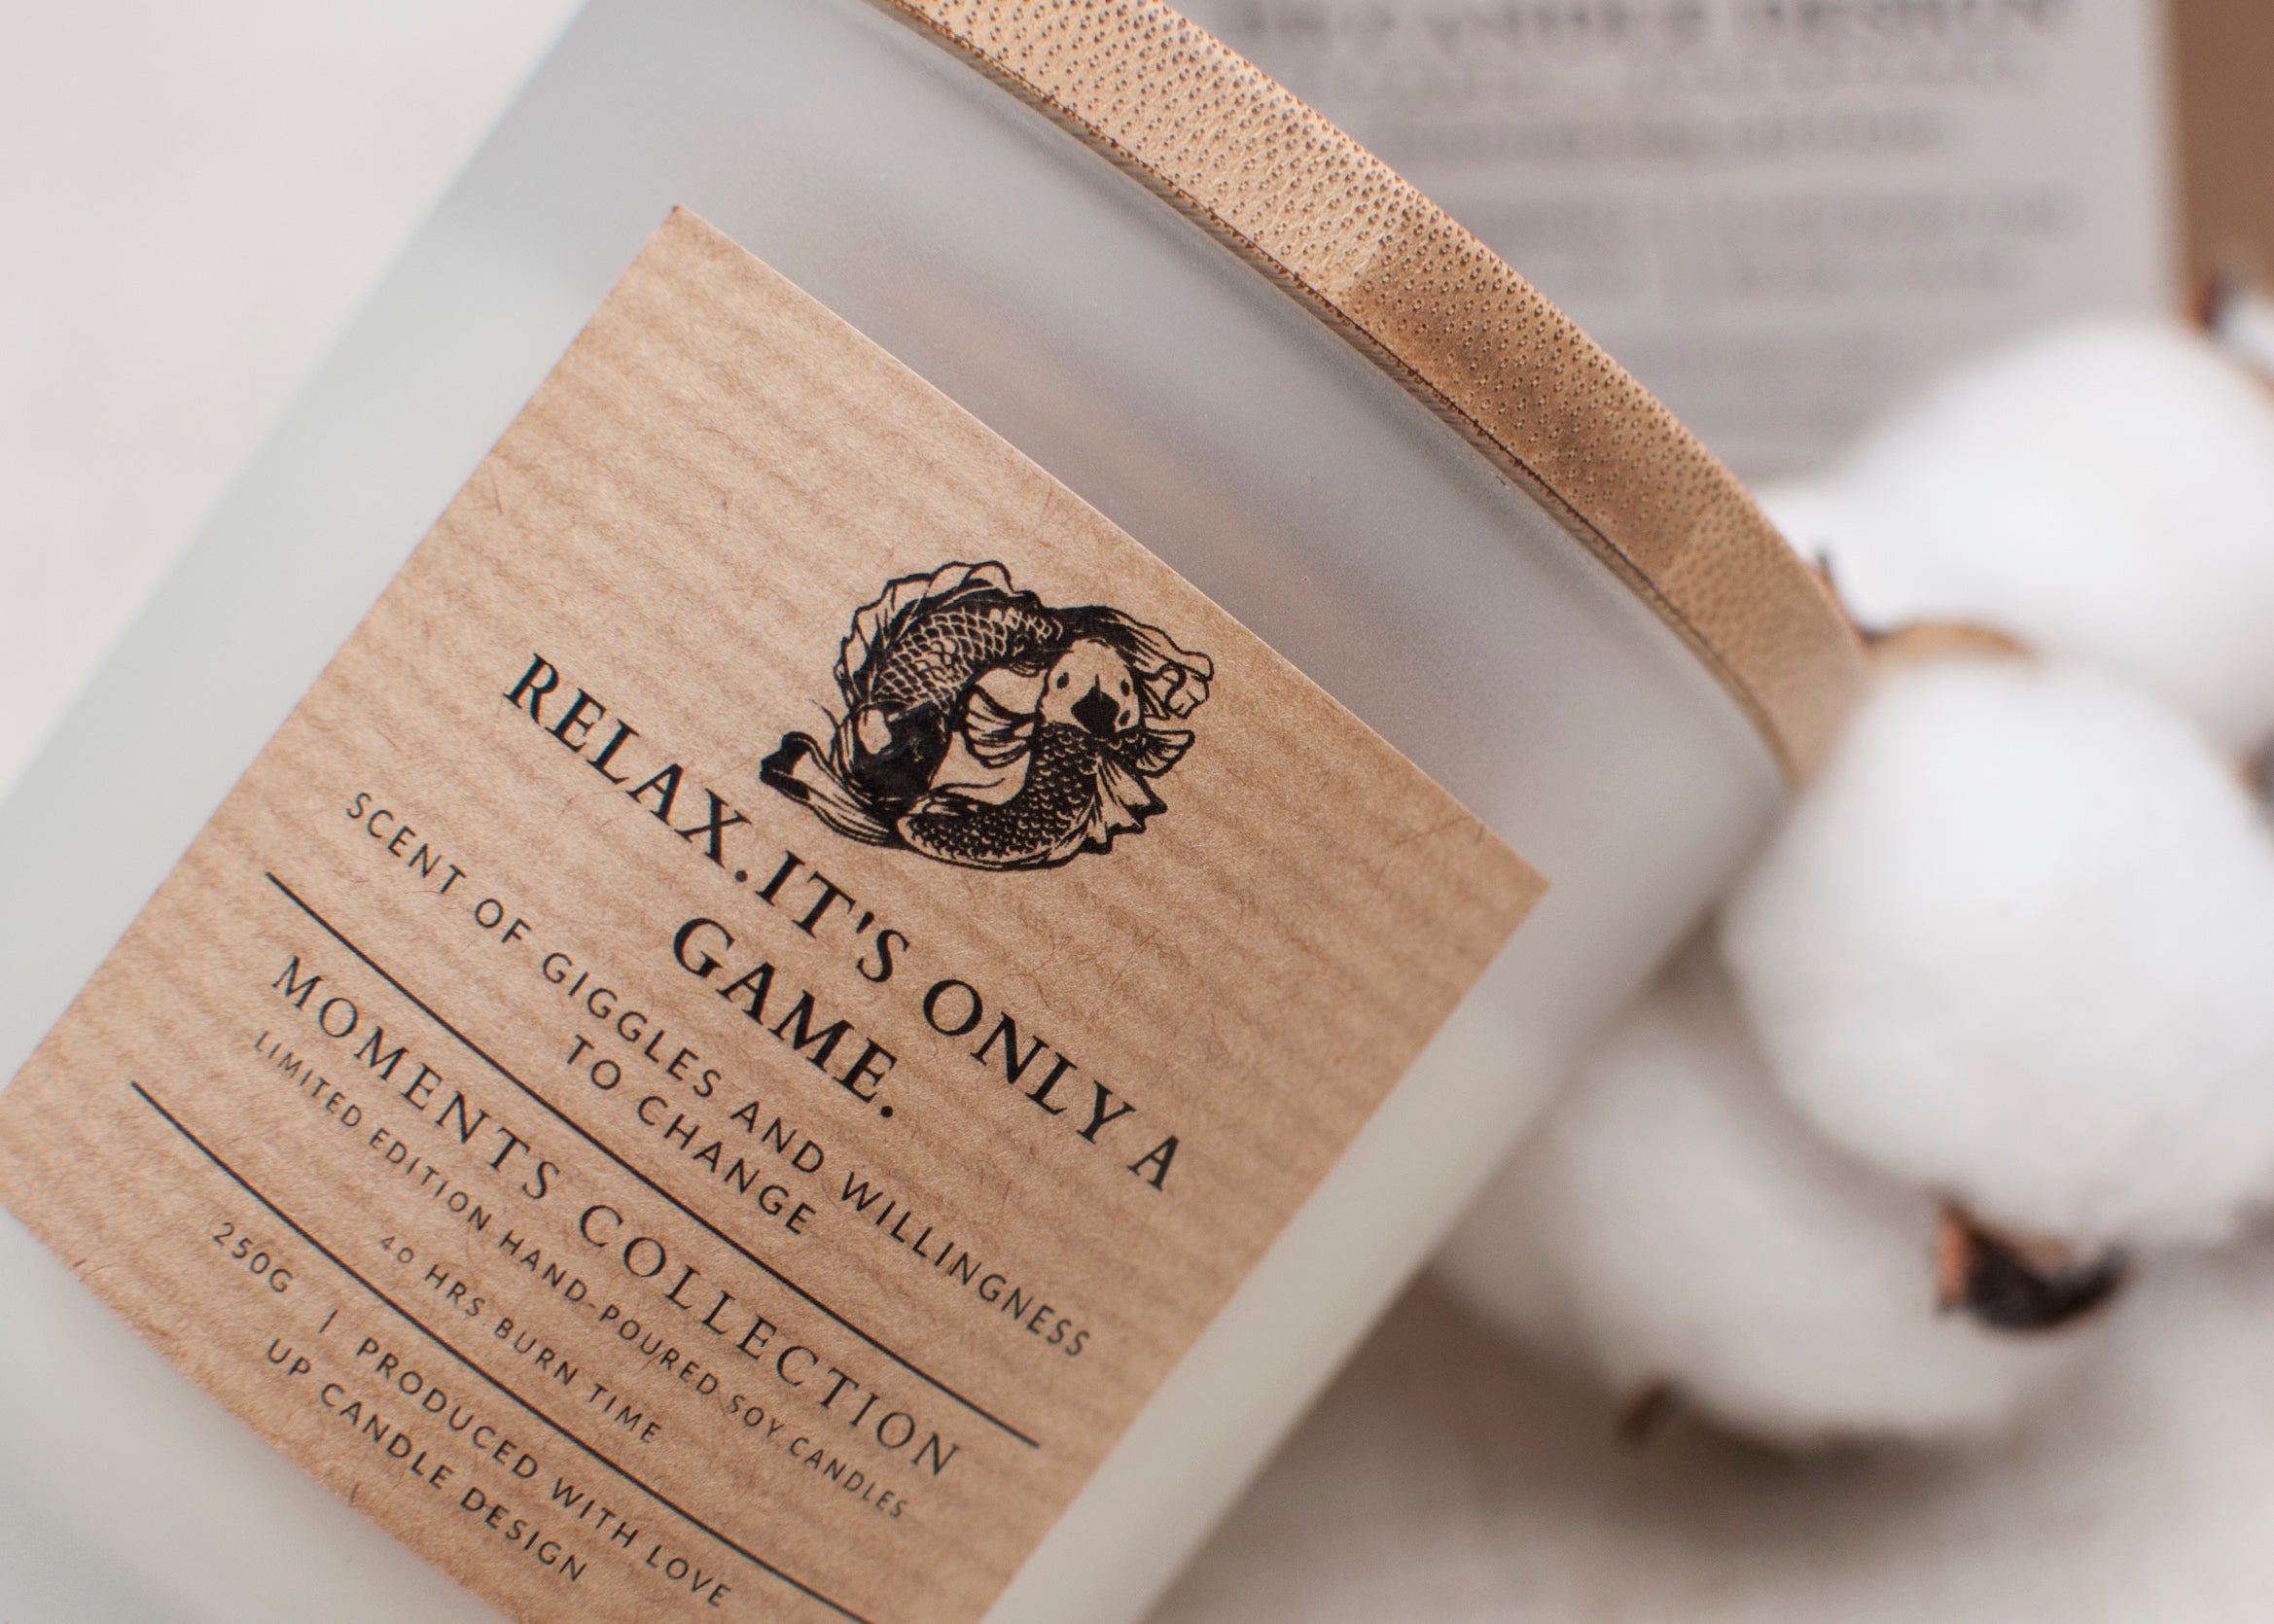 RELAX.IT'S ONLY A GAME - Scented Candle